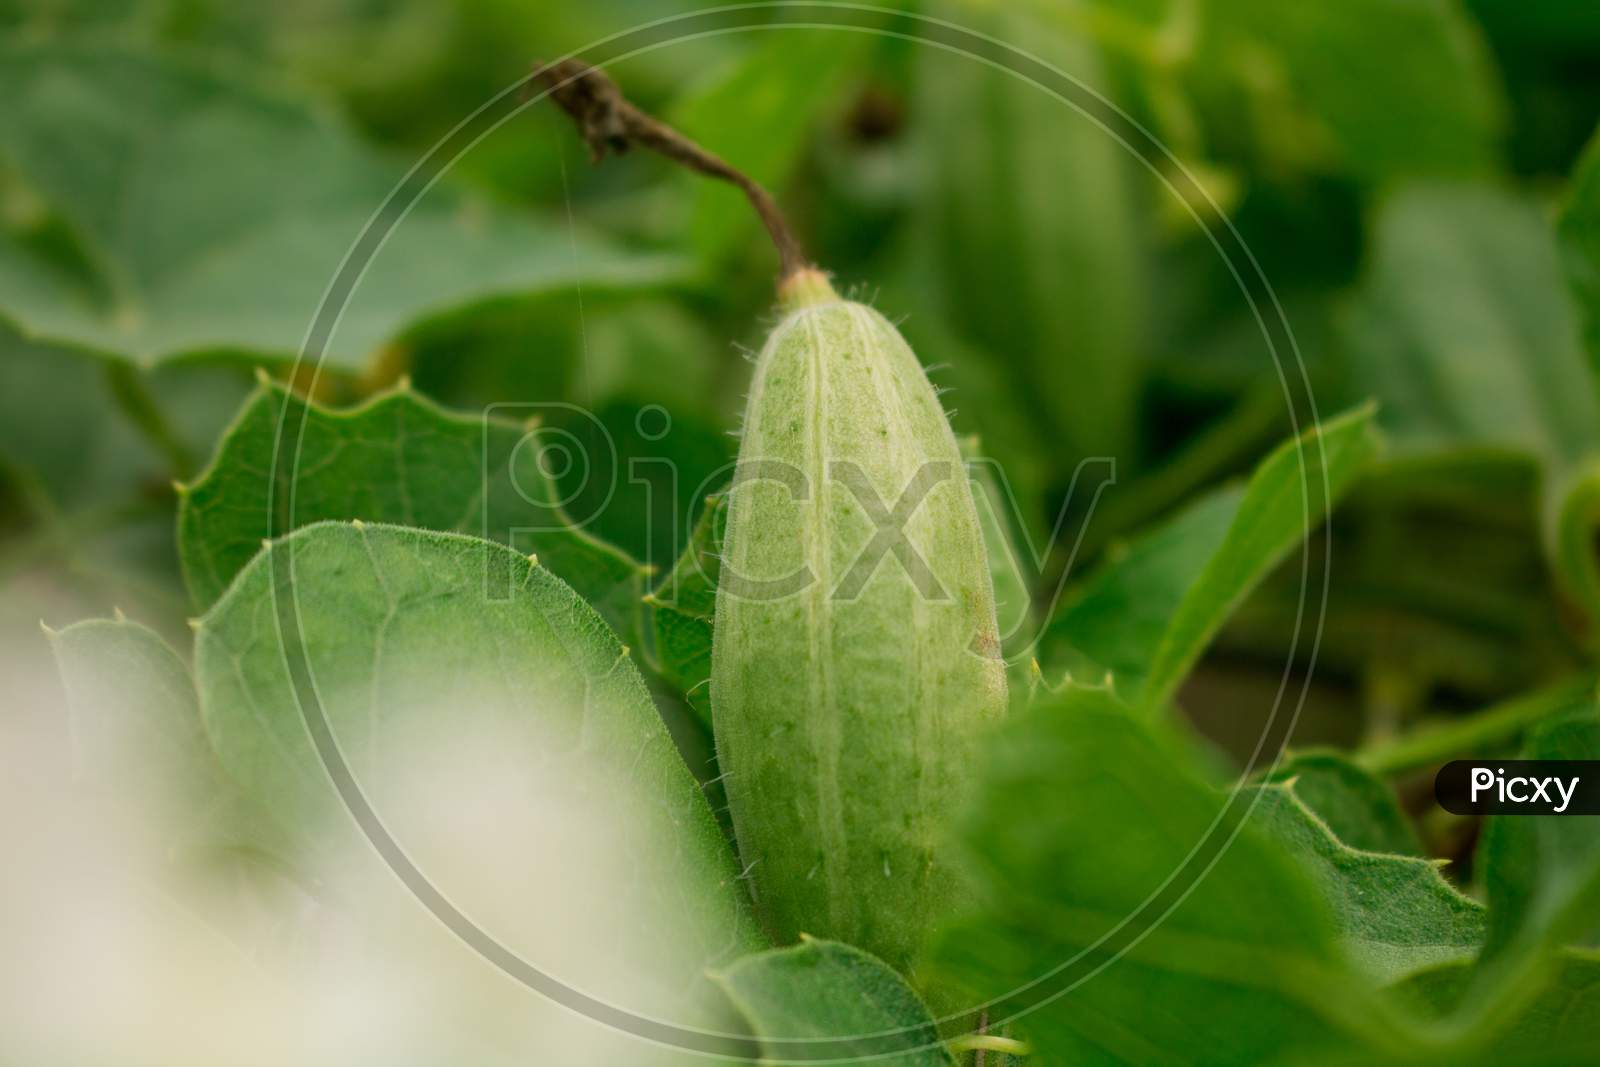 Trichosanthes Dioica, Also Known As Pointed Gourd, Is A Vine Plant In The Family Cucurbitaceae, Similar To Cucumber And Squash, Though Unlike Those It Is Perennial.